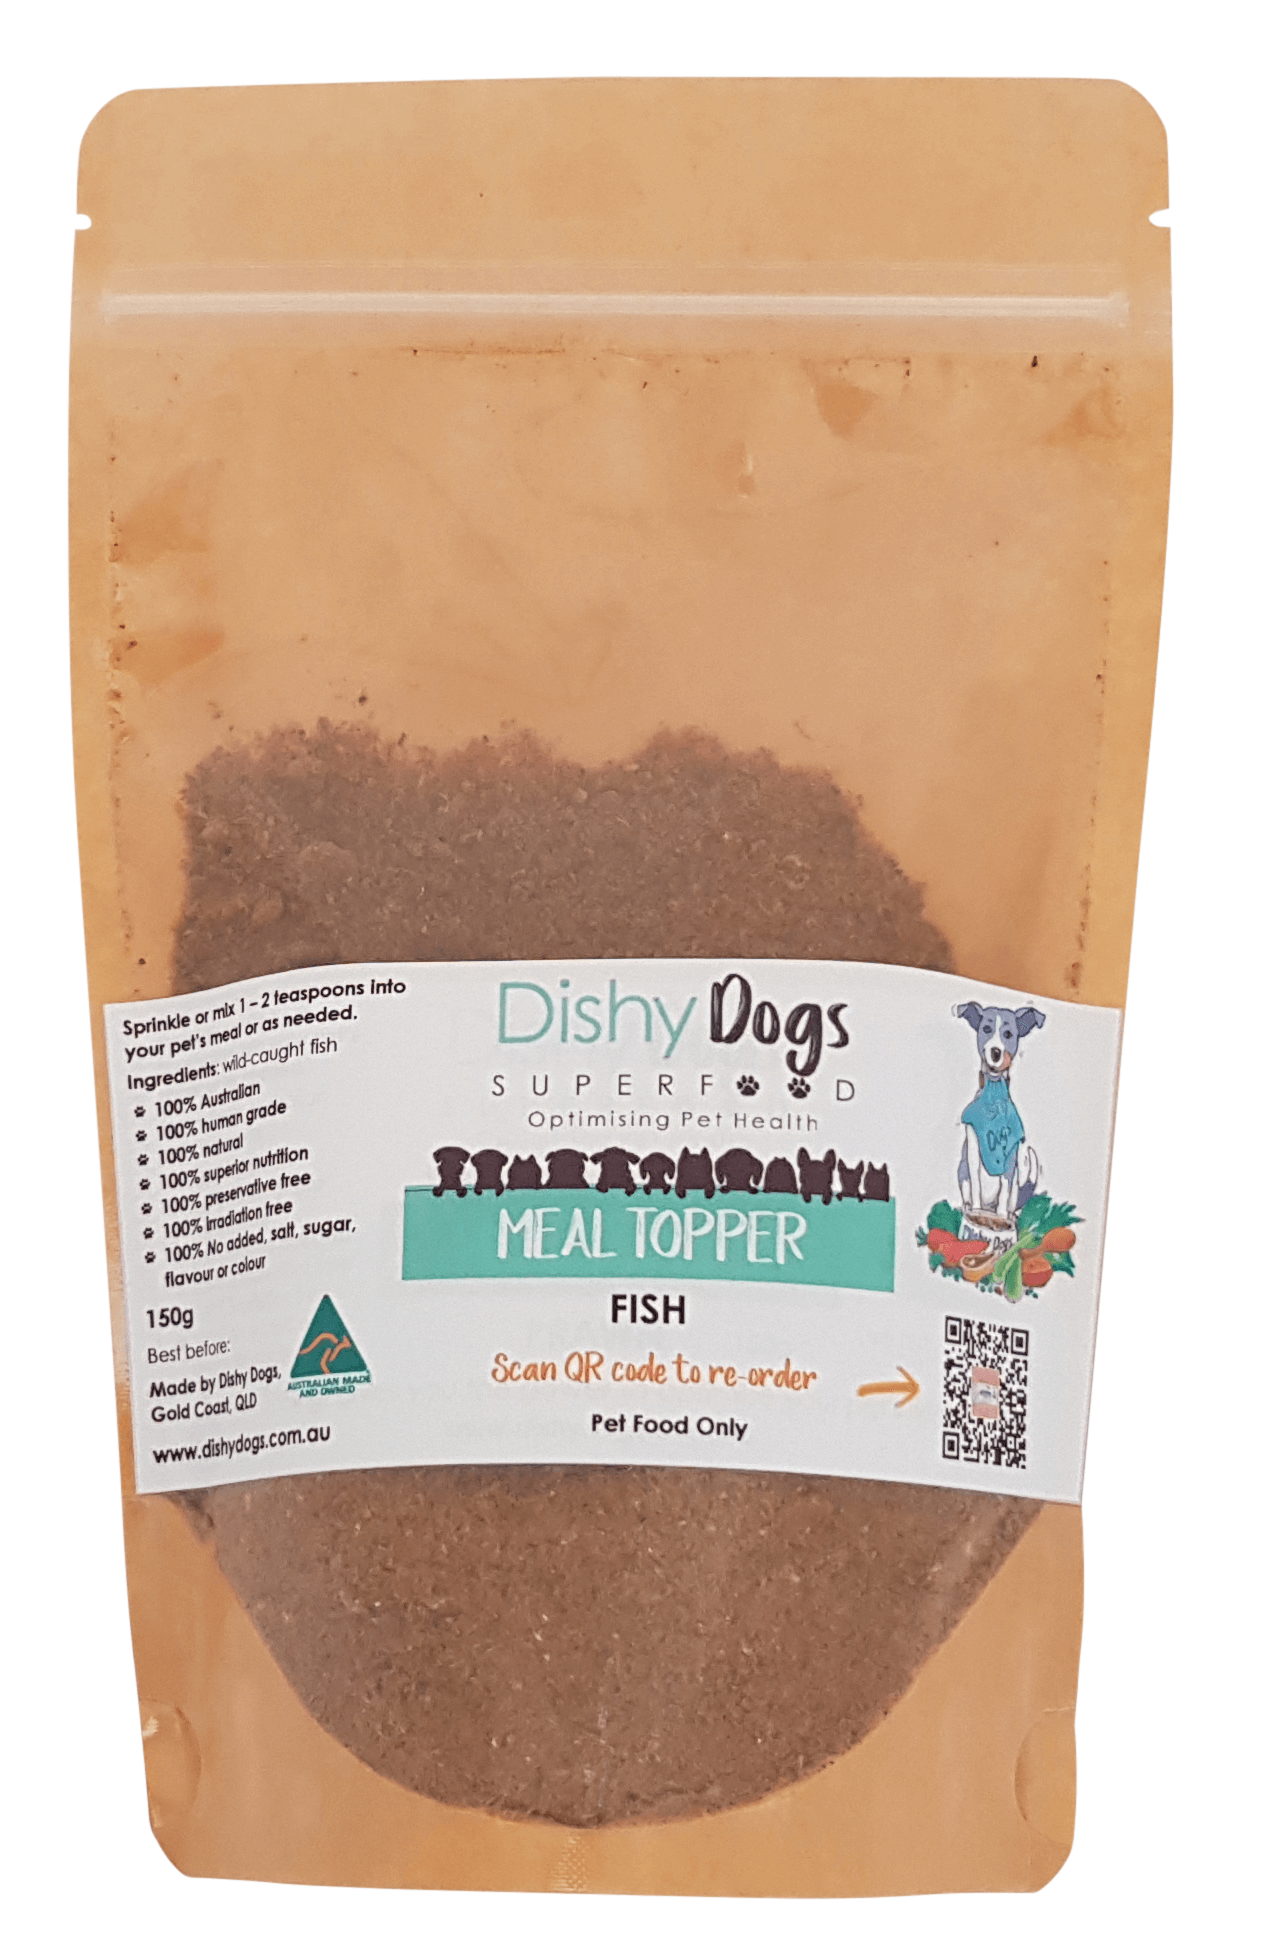 Fish Meal Topper, meal topper for dogs, dog meal topper, dog meal toppers, meal topper for dogs